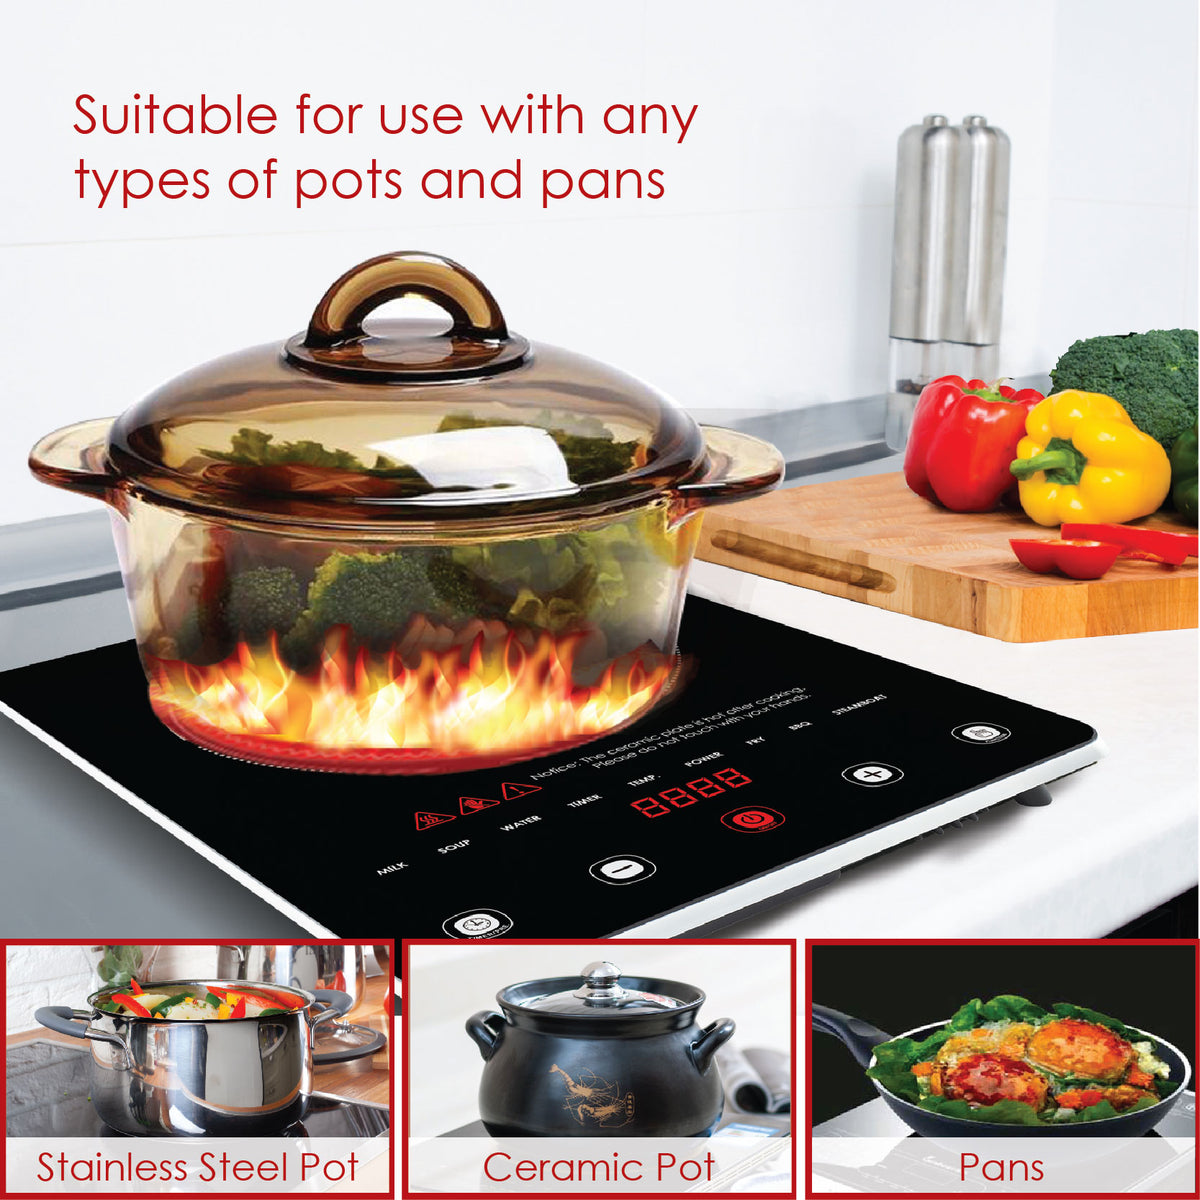 Ceramic Cooker (Any Pot) 2000 Watts (PPIC880) - PowerPacSG